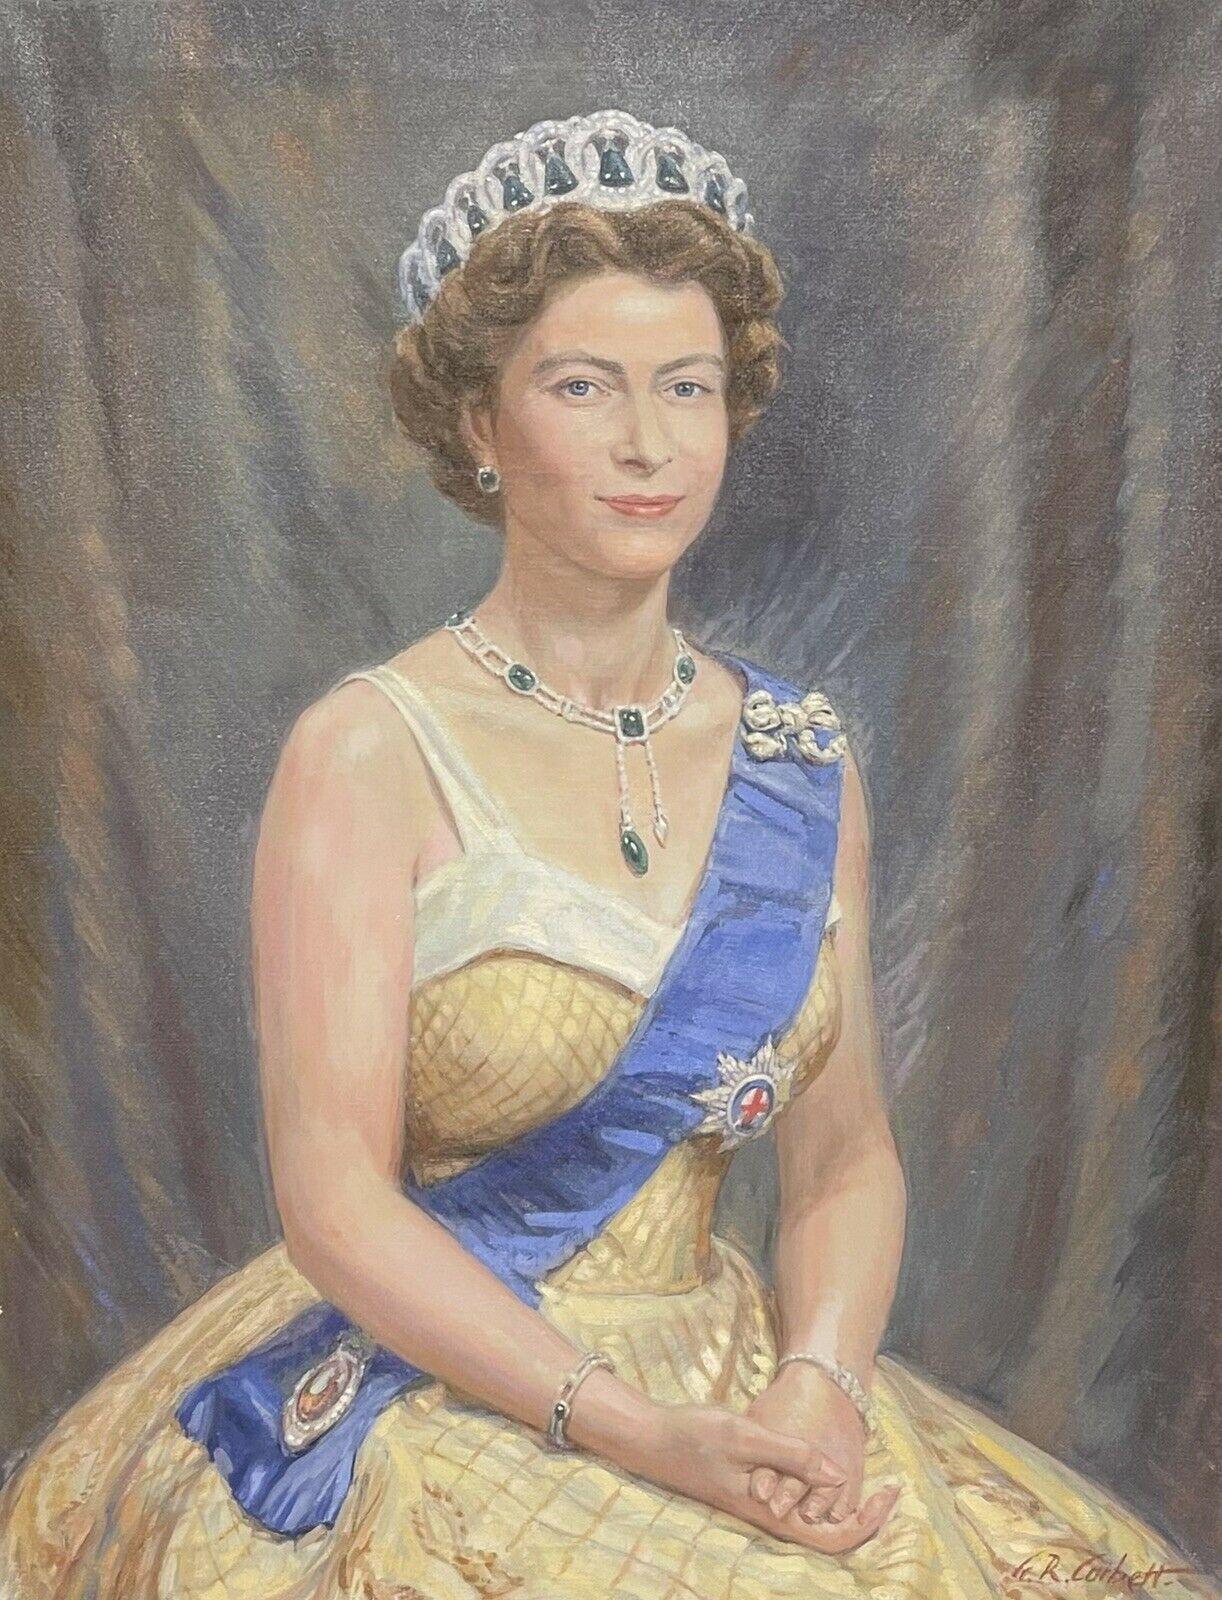 Queen Elizabeth II of Great Britain art Dream-art Oil painting of a young H.R.H 